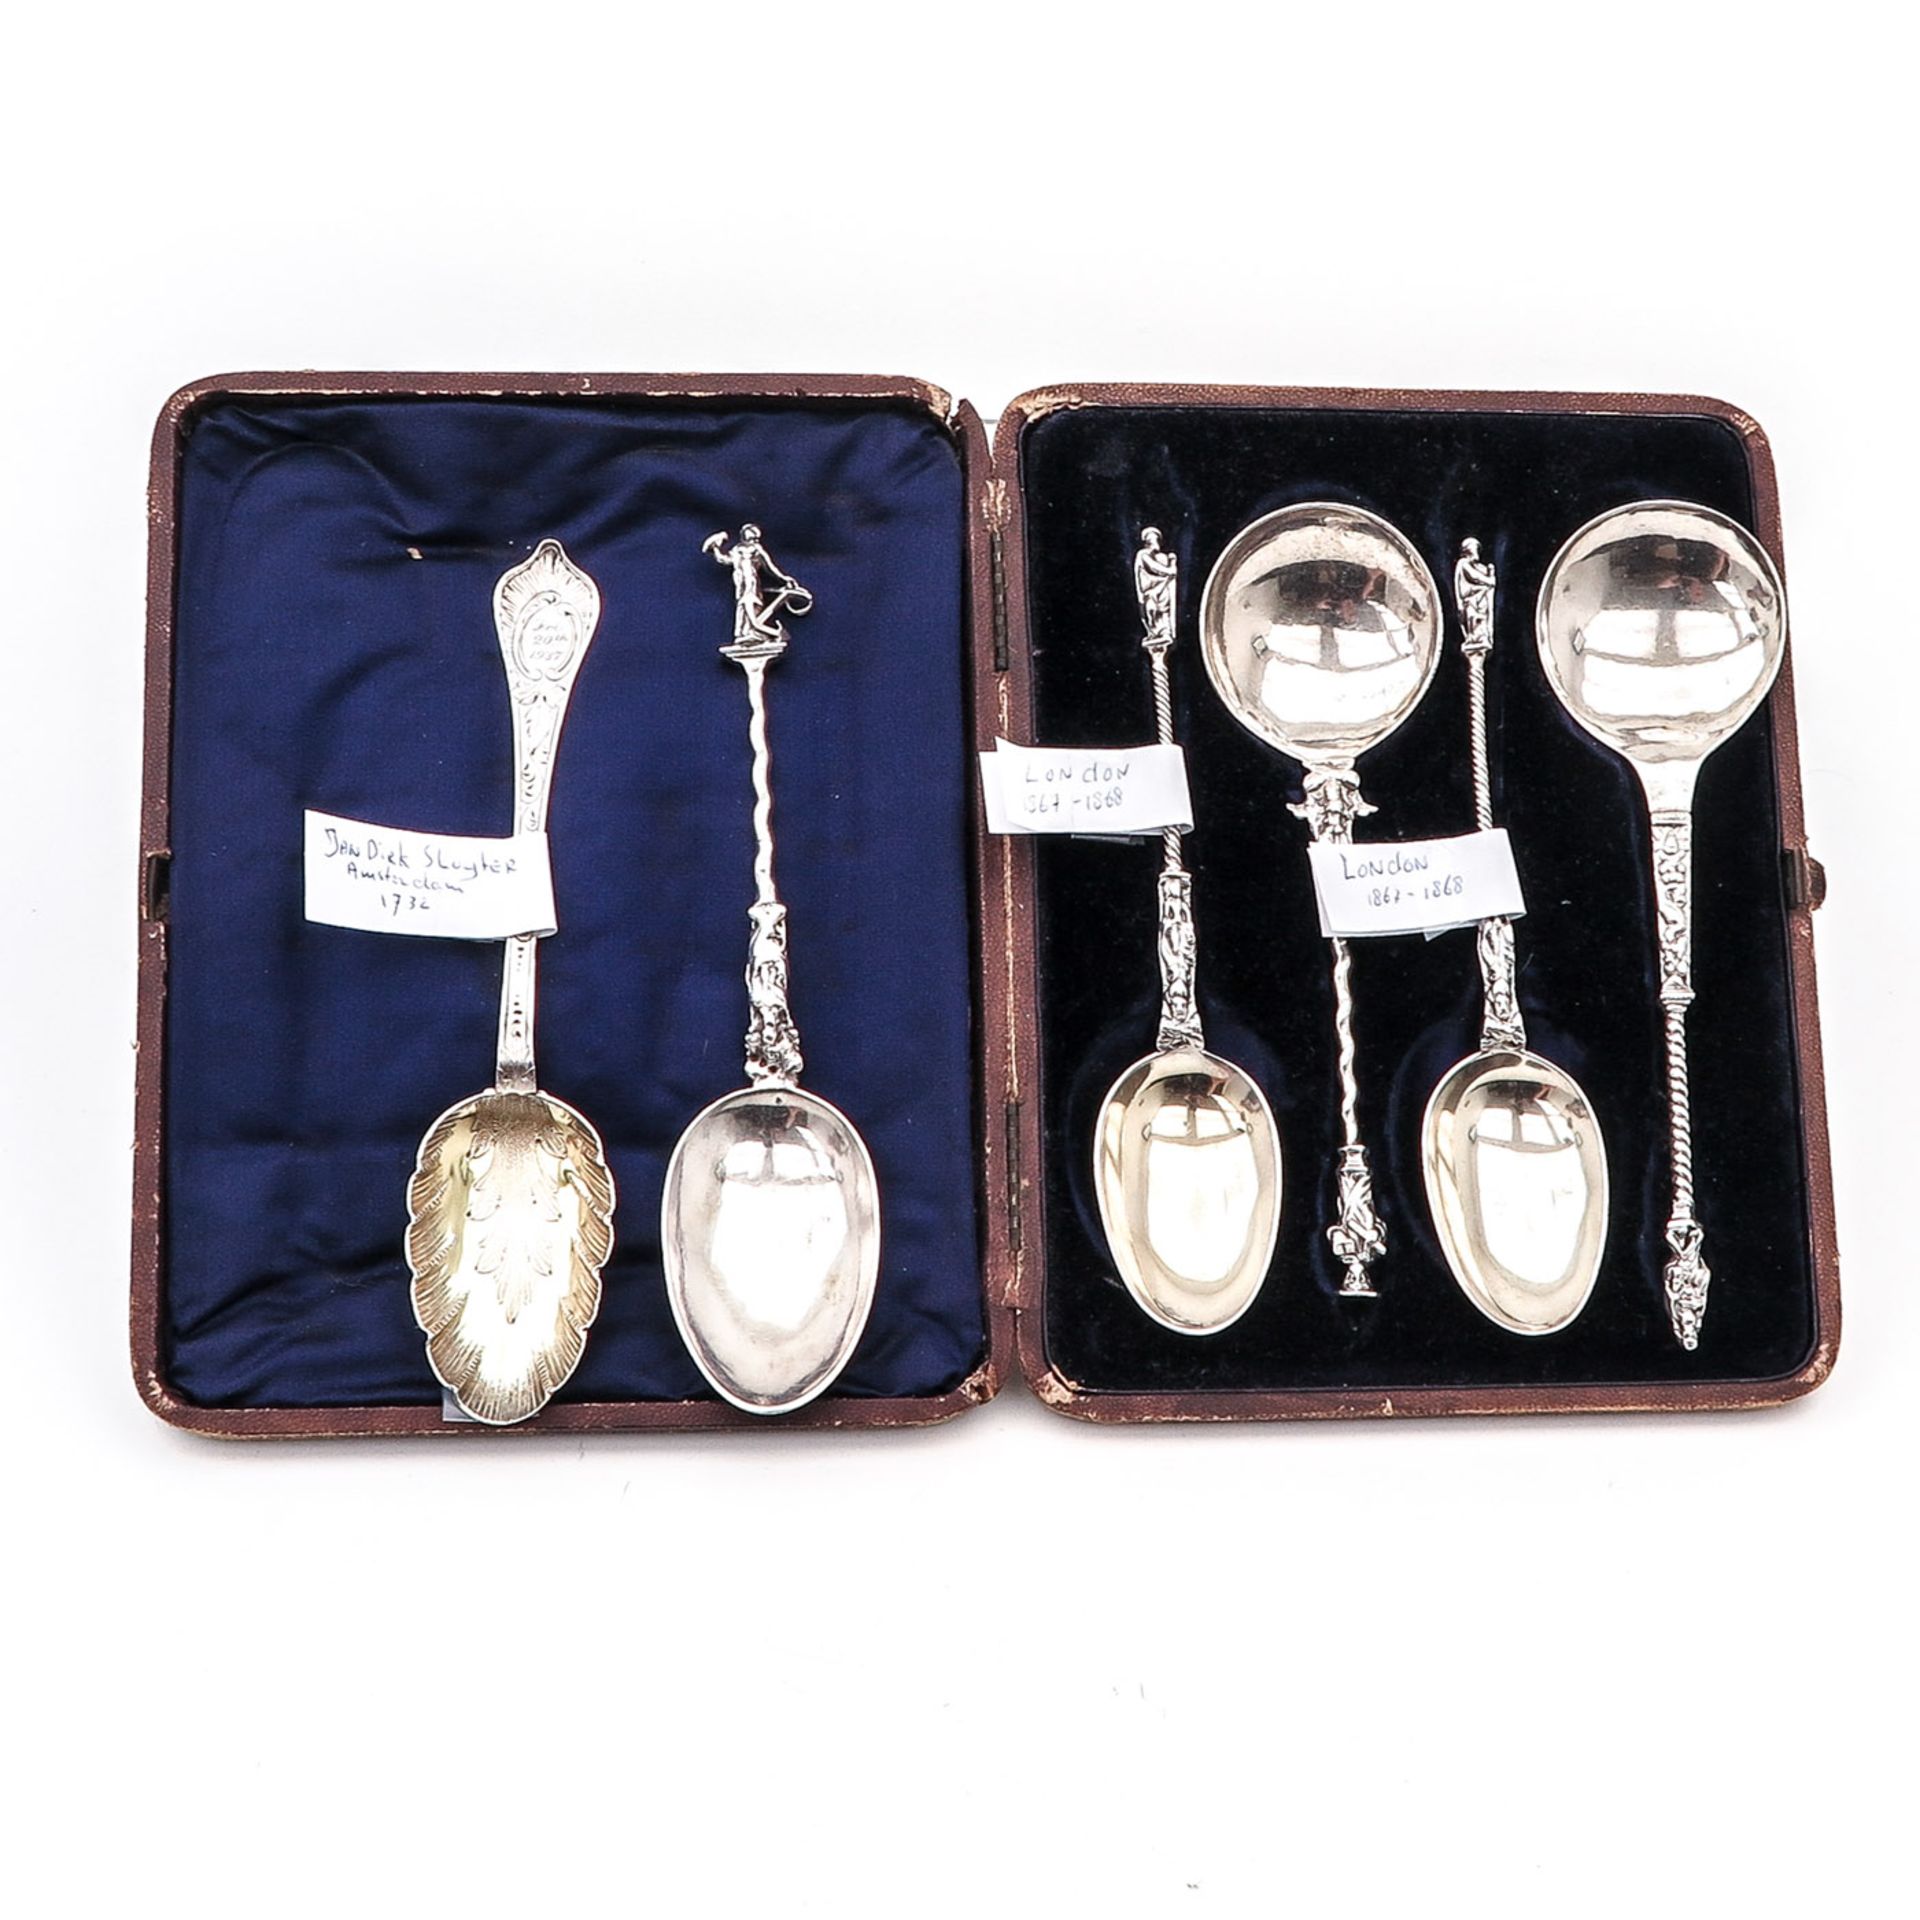 A Collection of Six Spoons